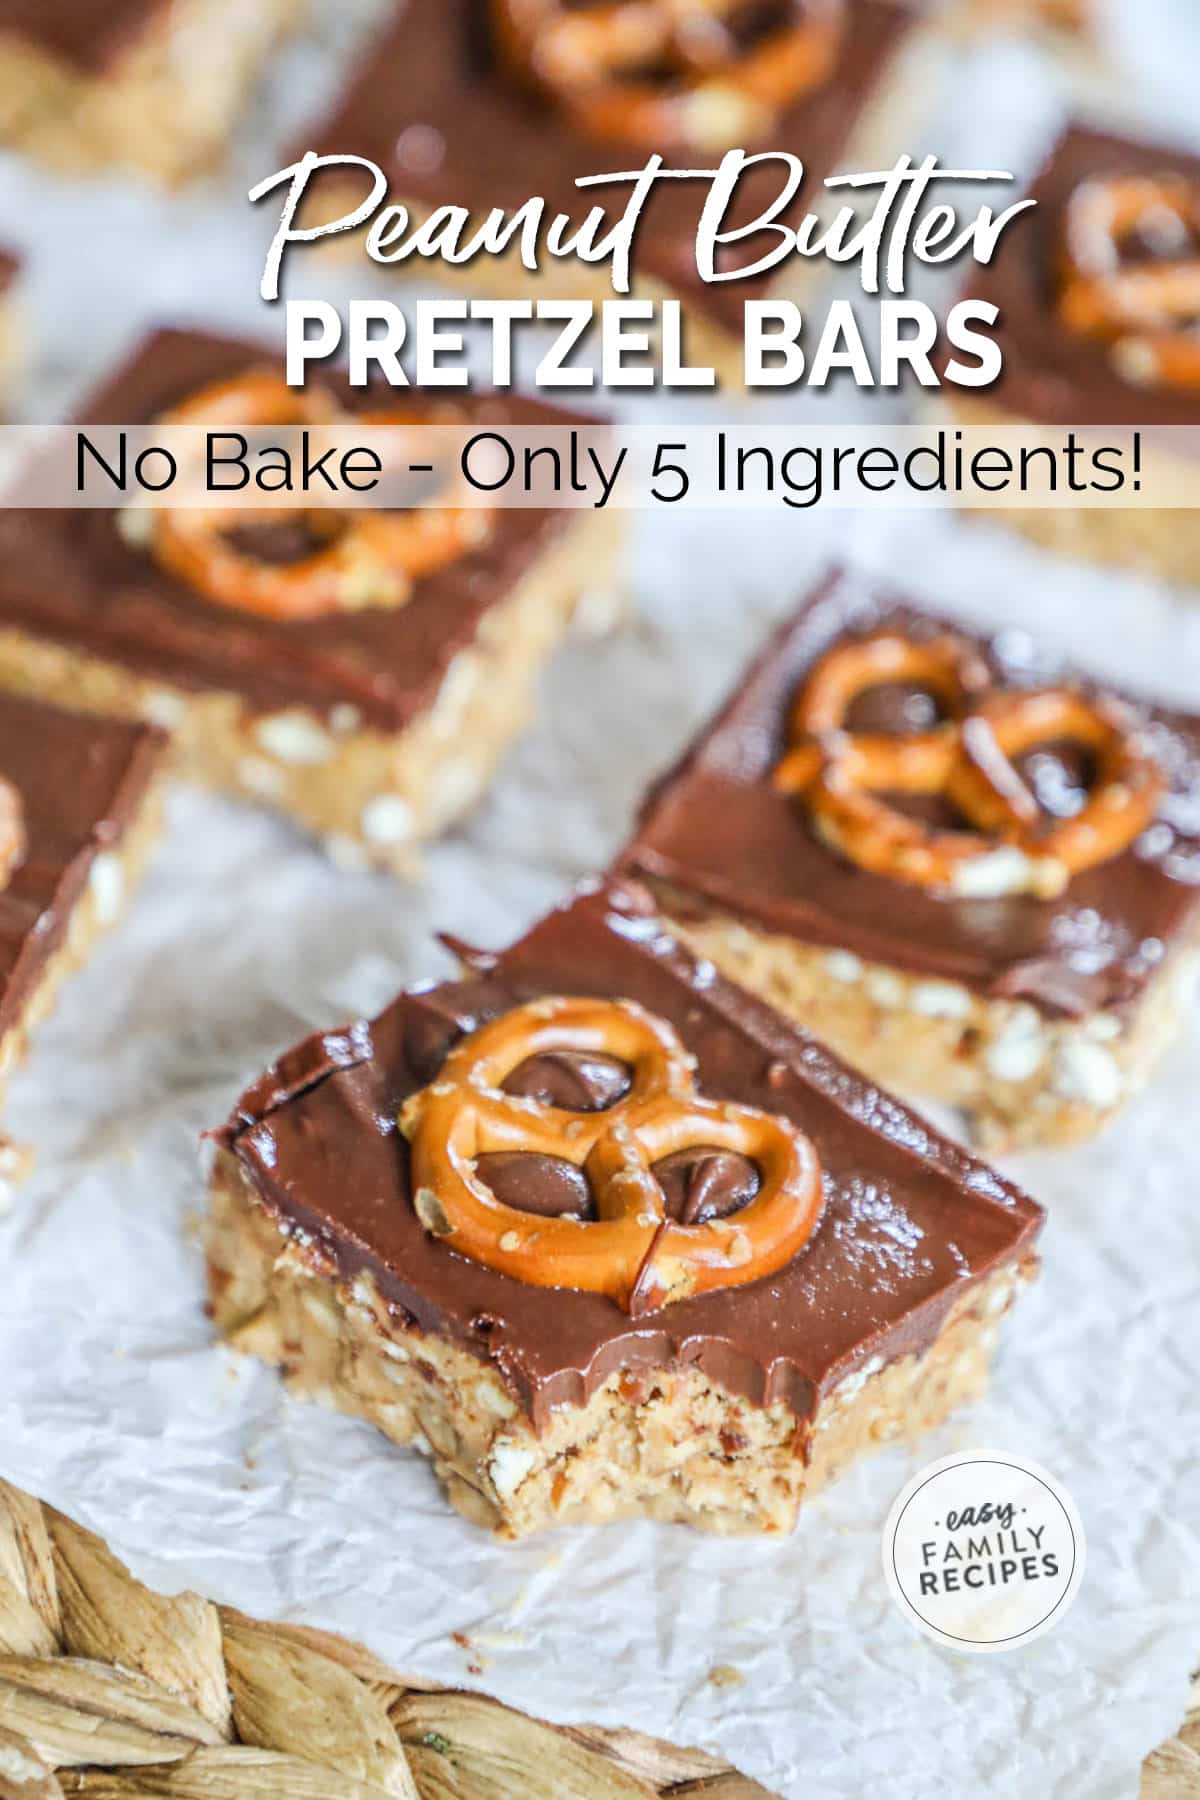 Peanut butter pretzel chocolate bars with a single pretzel twist on the top of each square.